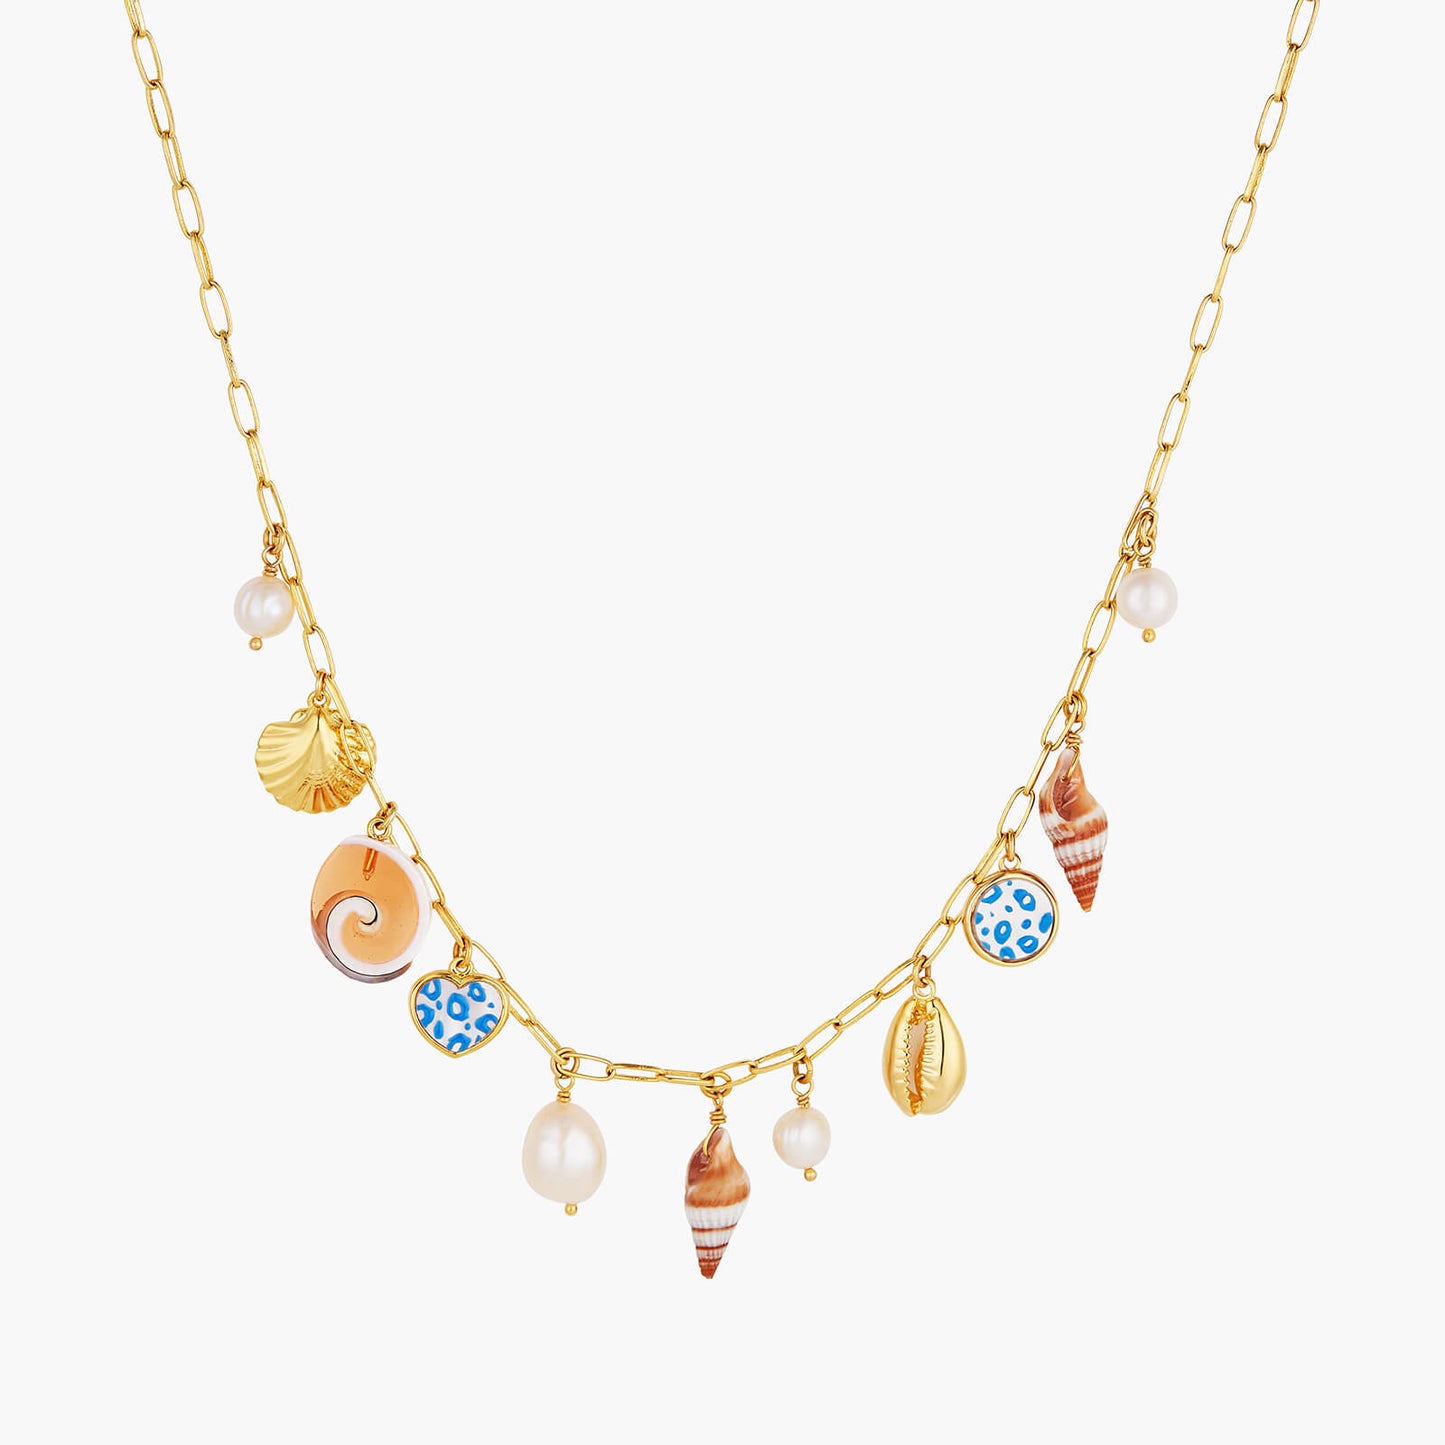 Pearls, Mother Of Pearl And Seashells Charm Neckace | AOGL3081